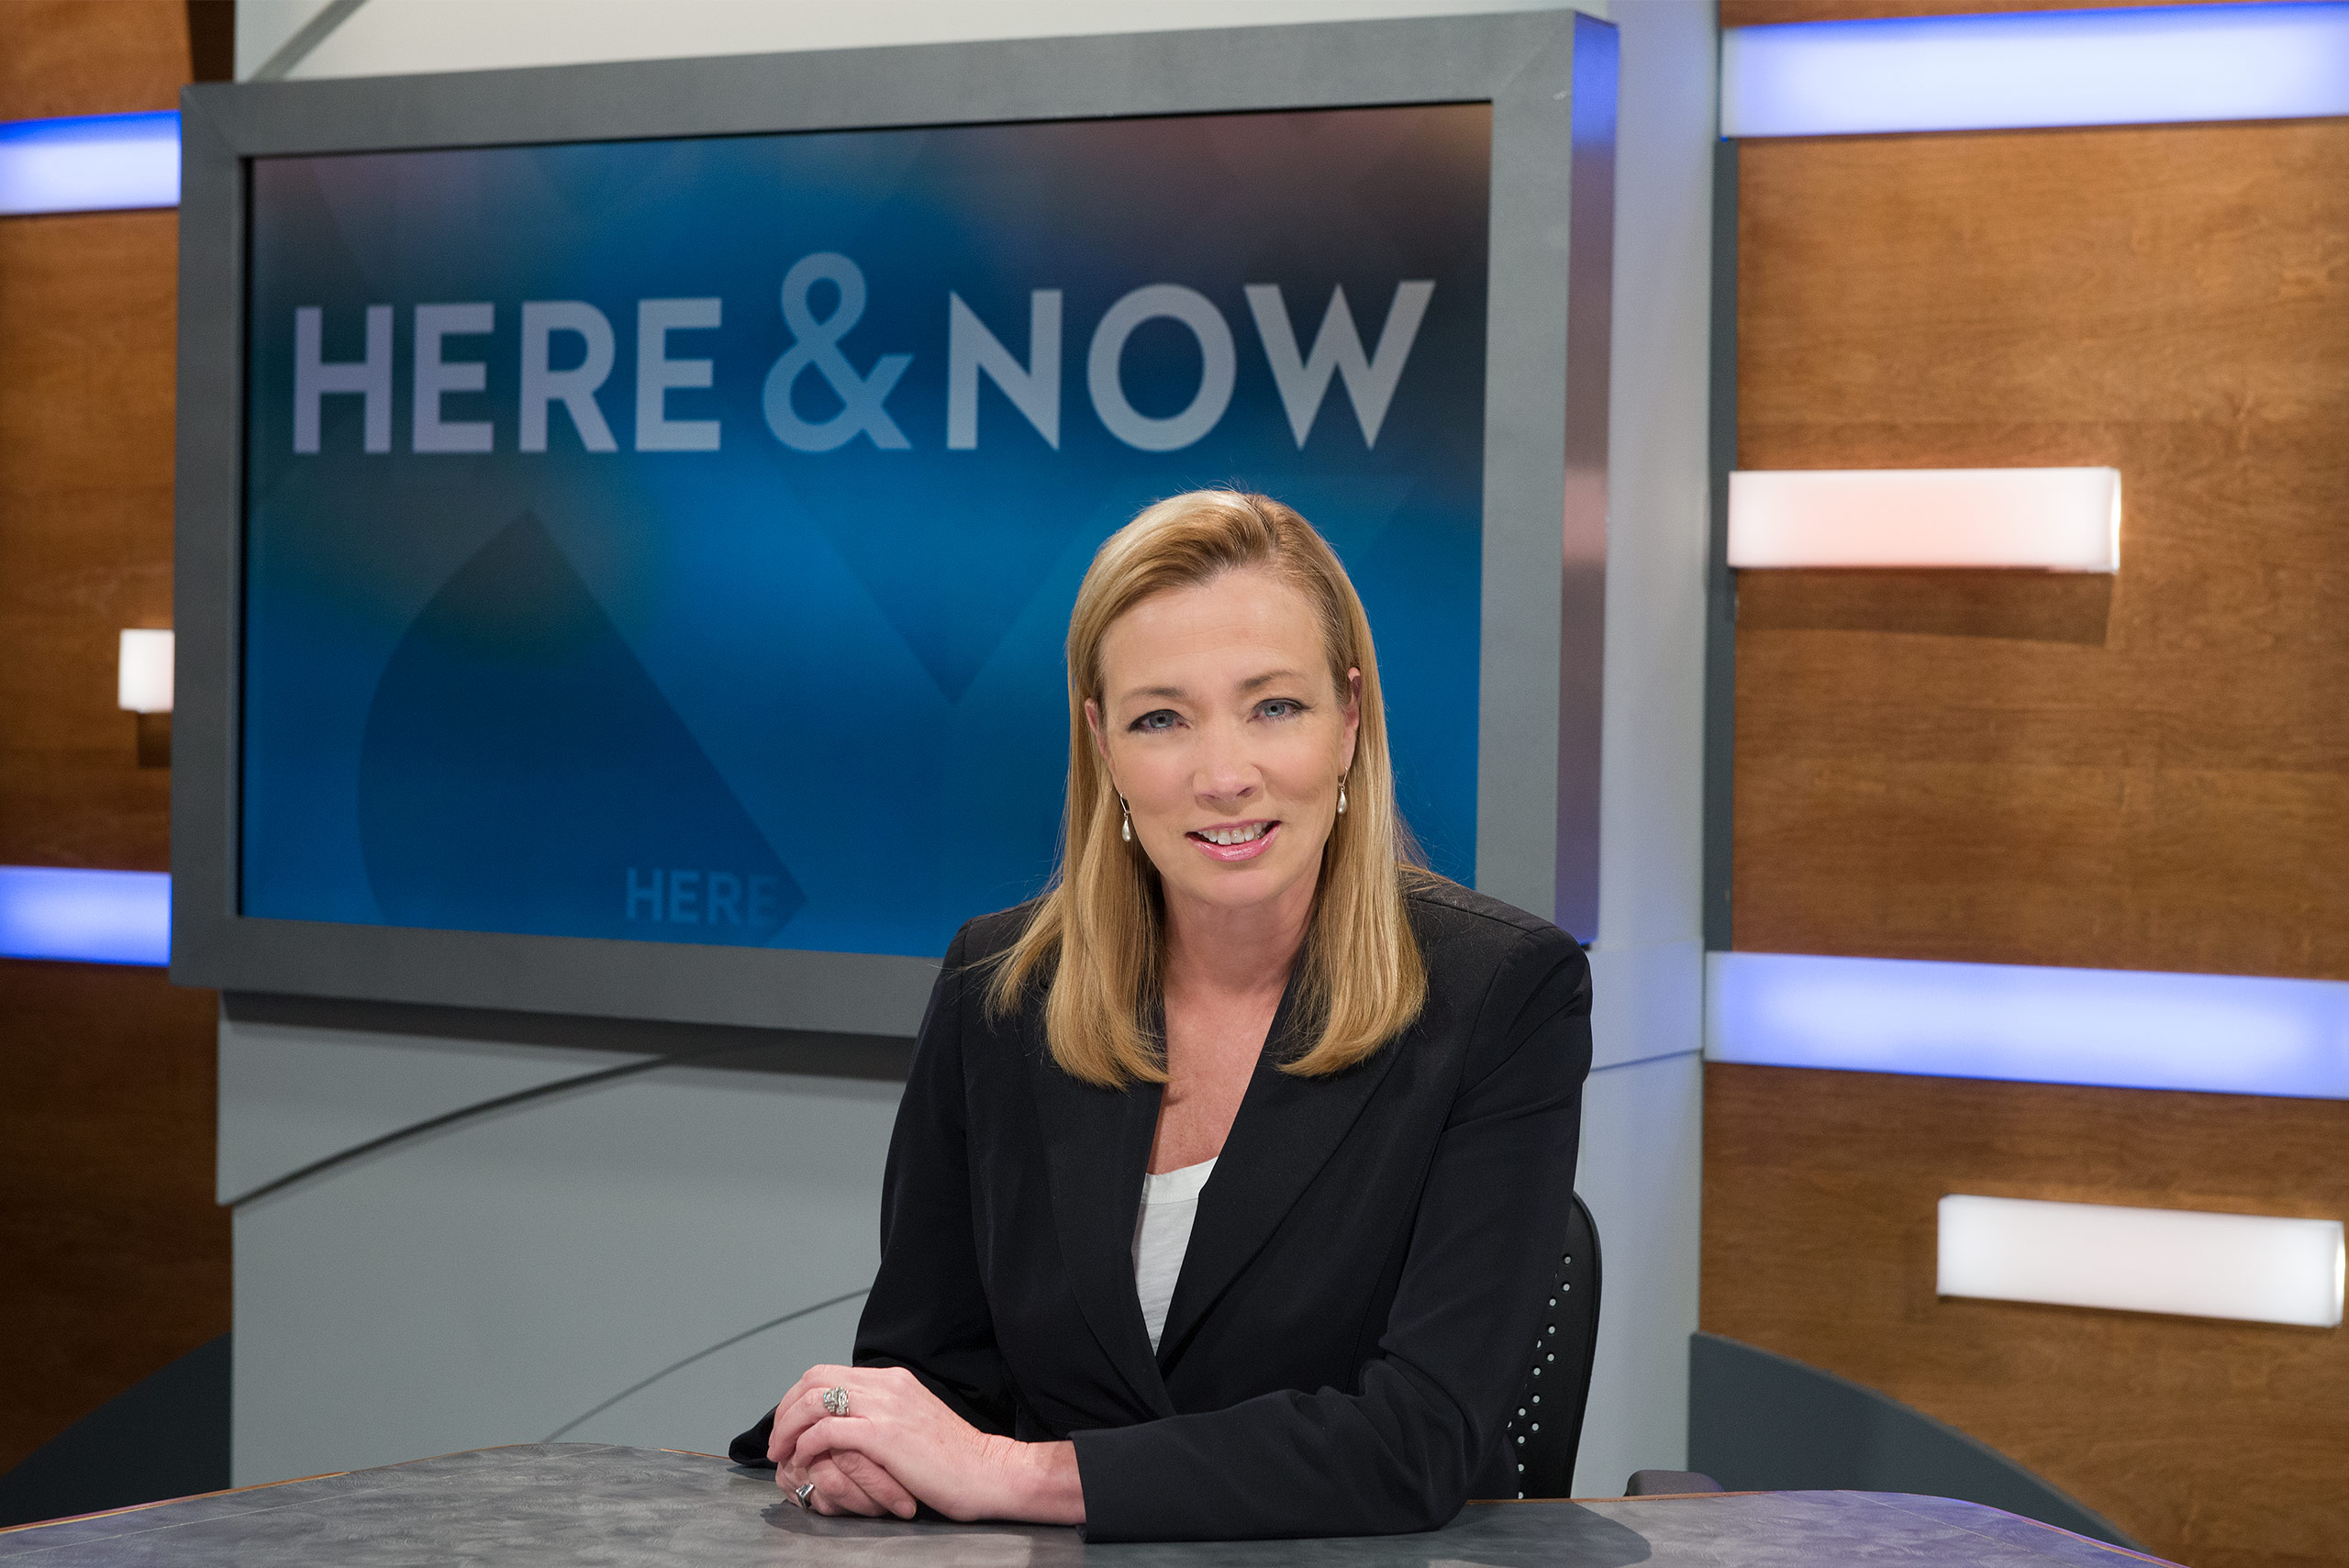 Here & Now anchor Frederica Freyberg